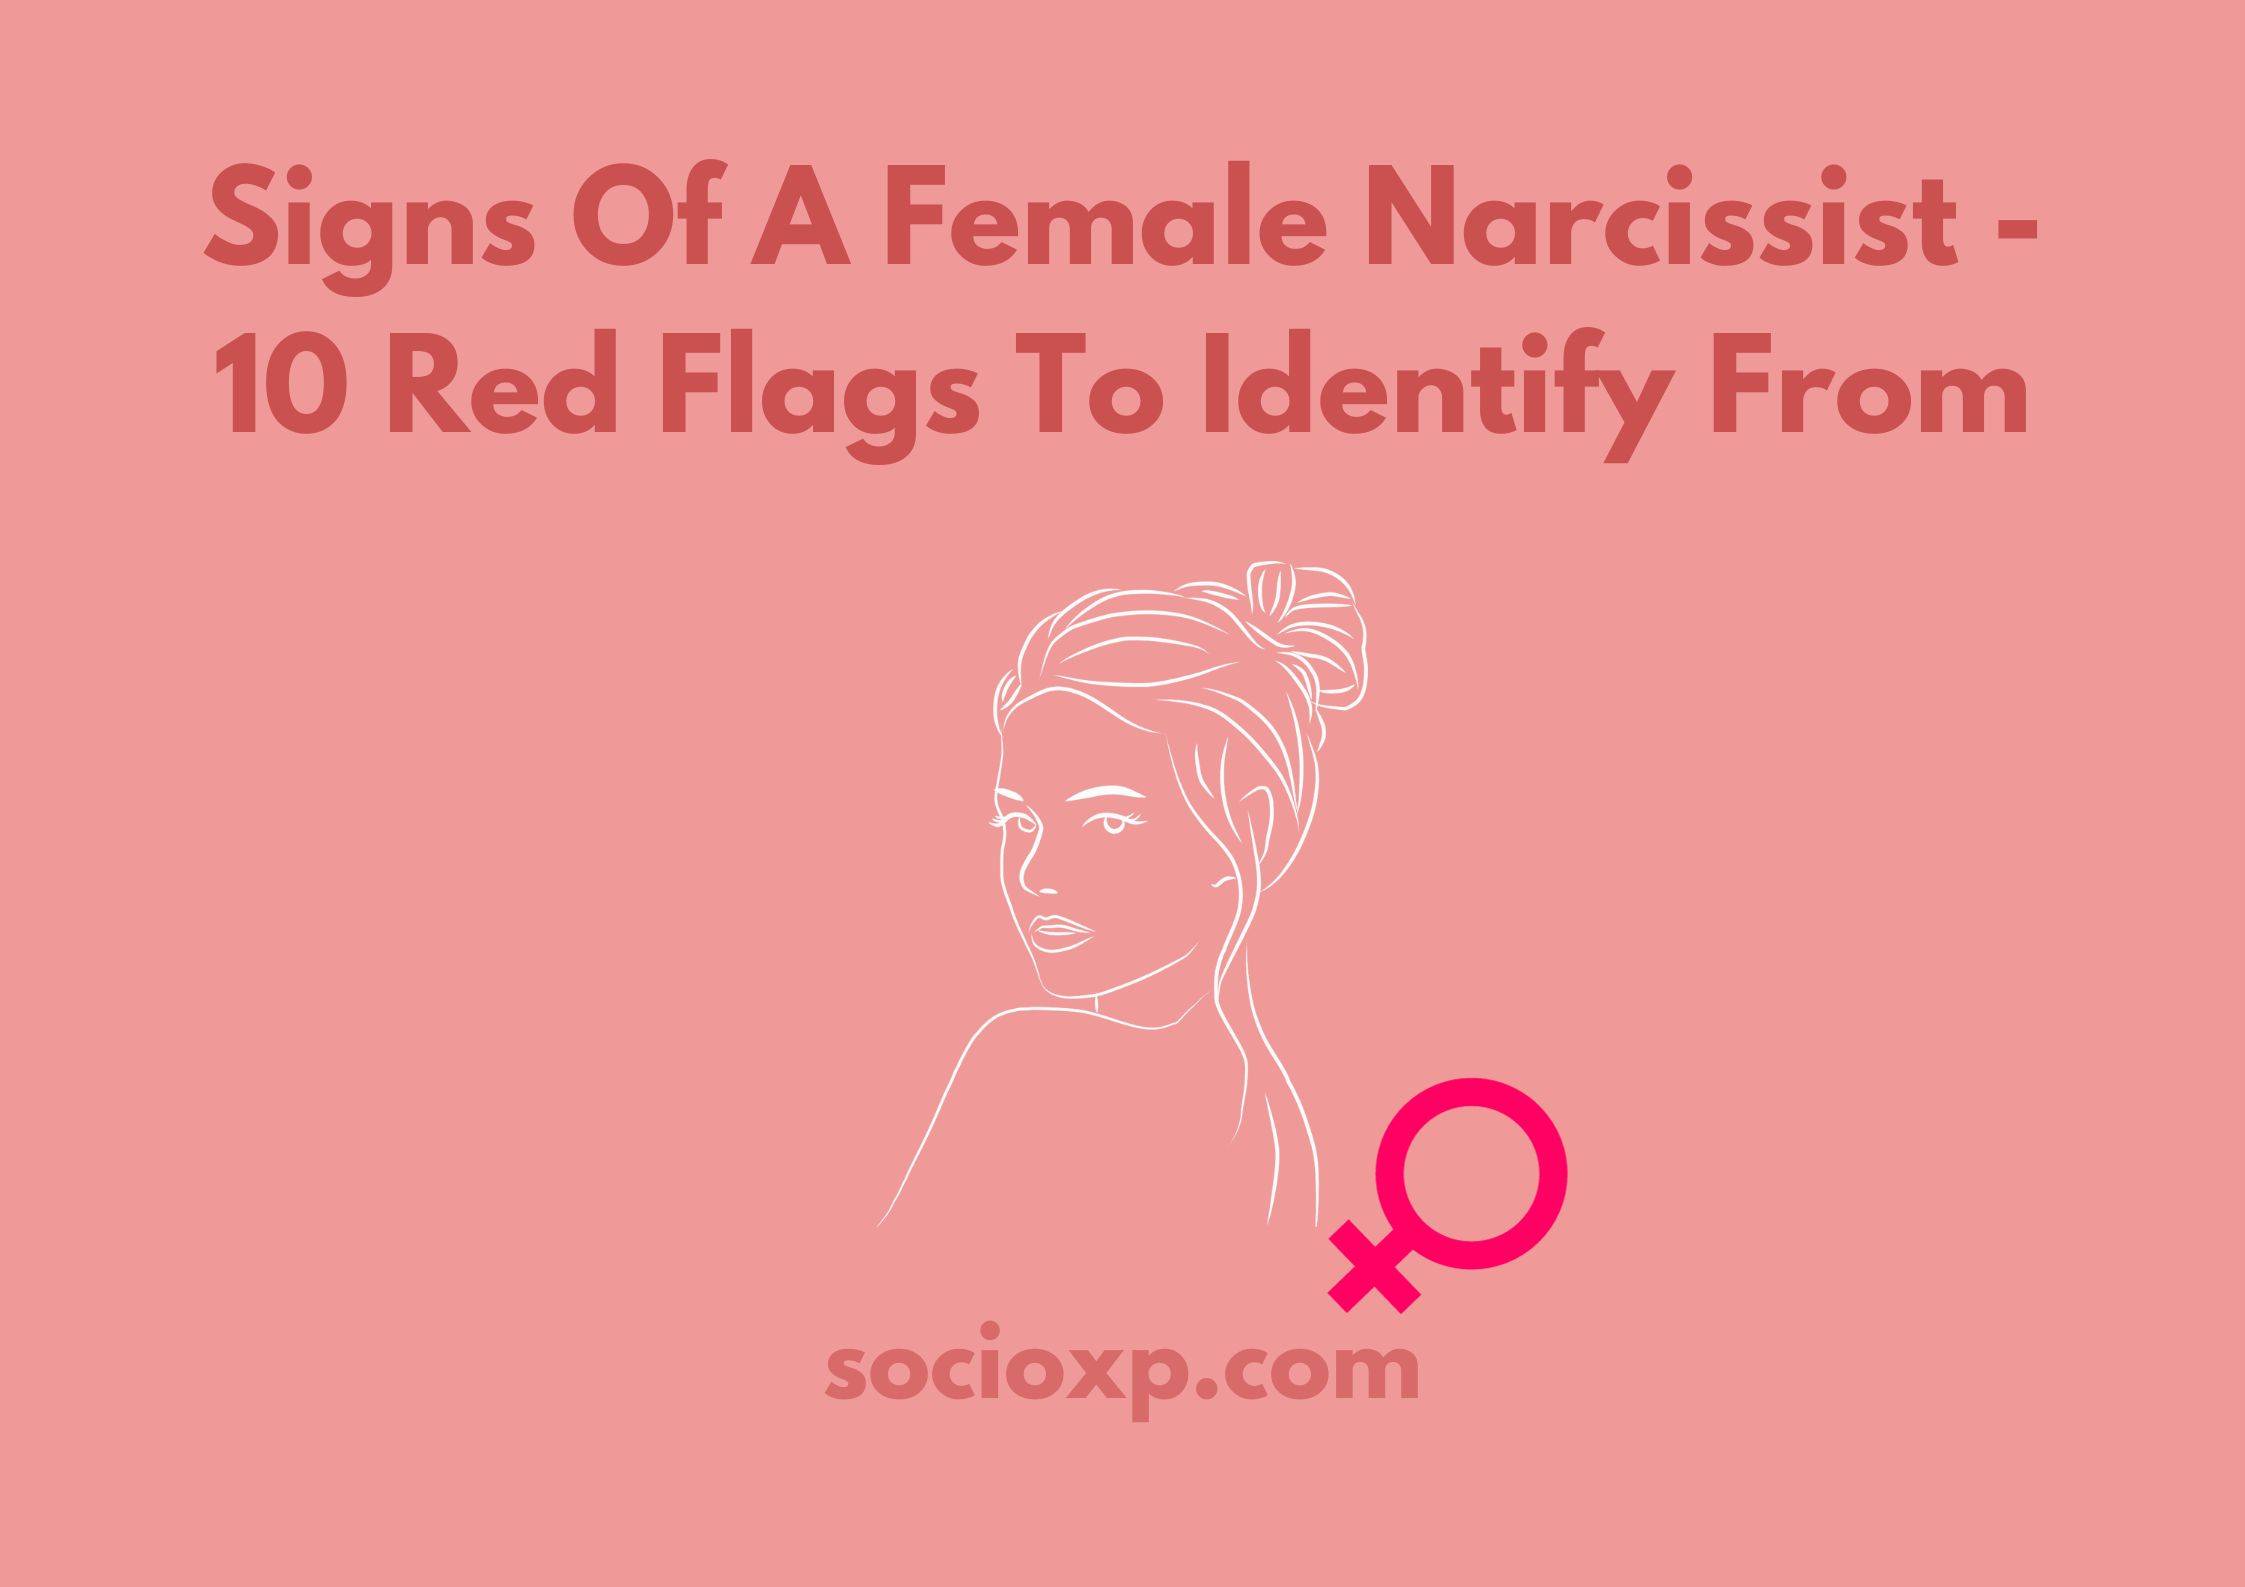 Signs Of A Female Narcissist - 10 Red Flags To Identify From